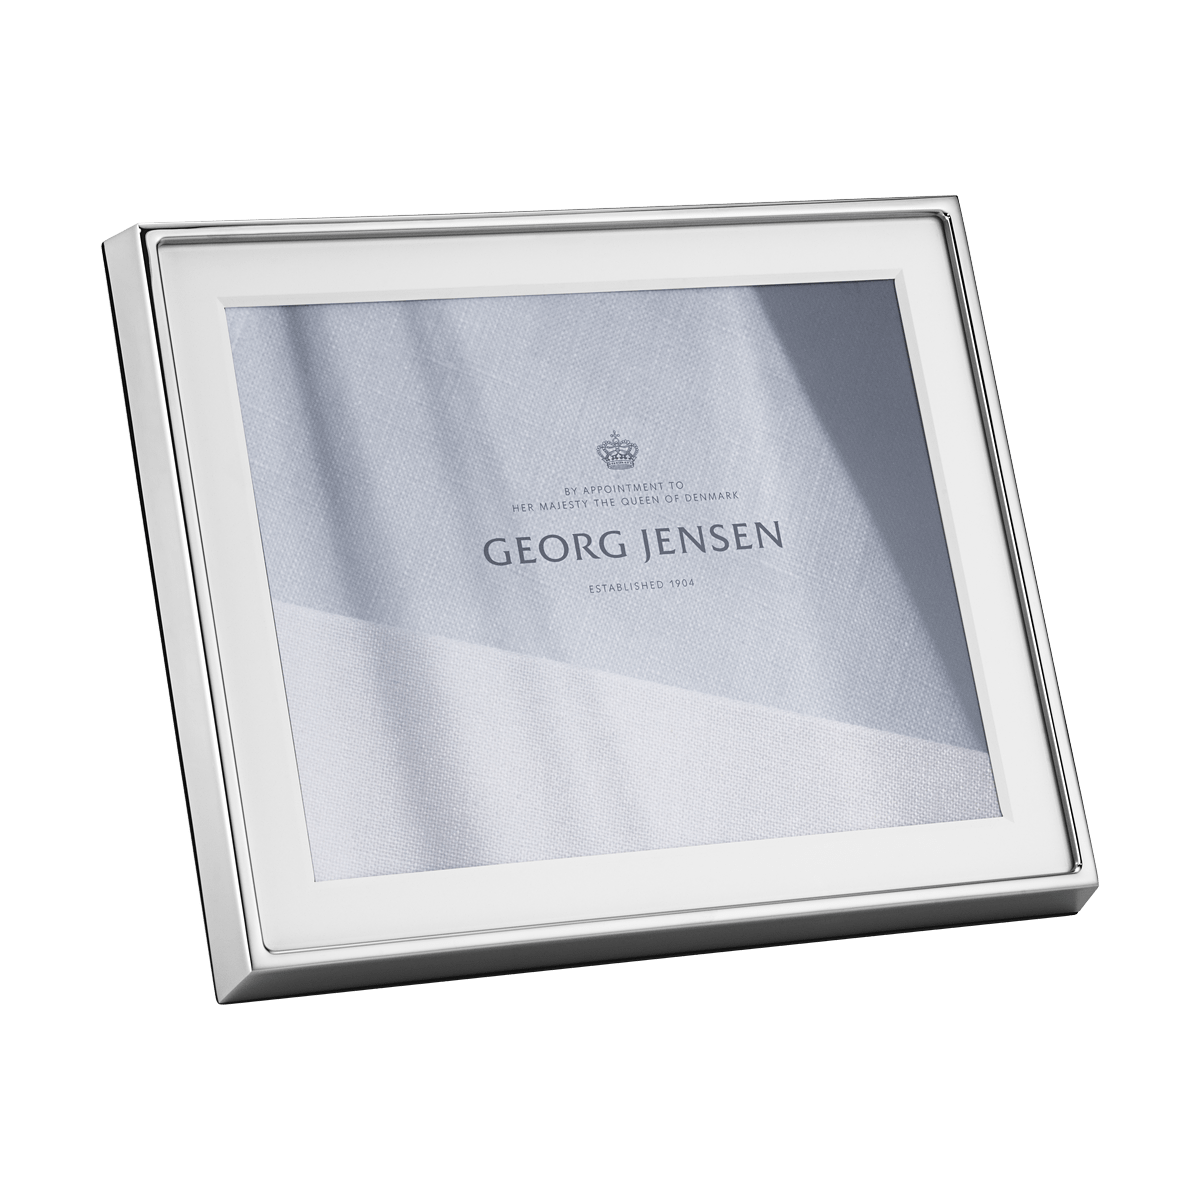 Georg Jensen Picture Frame Deco Stainless Steel Mirror Plastic 10X12 In